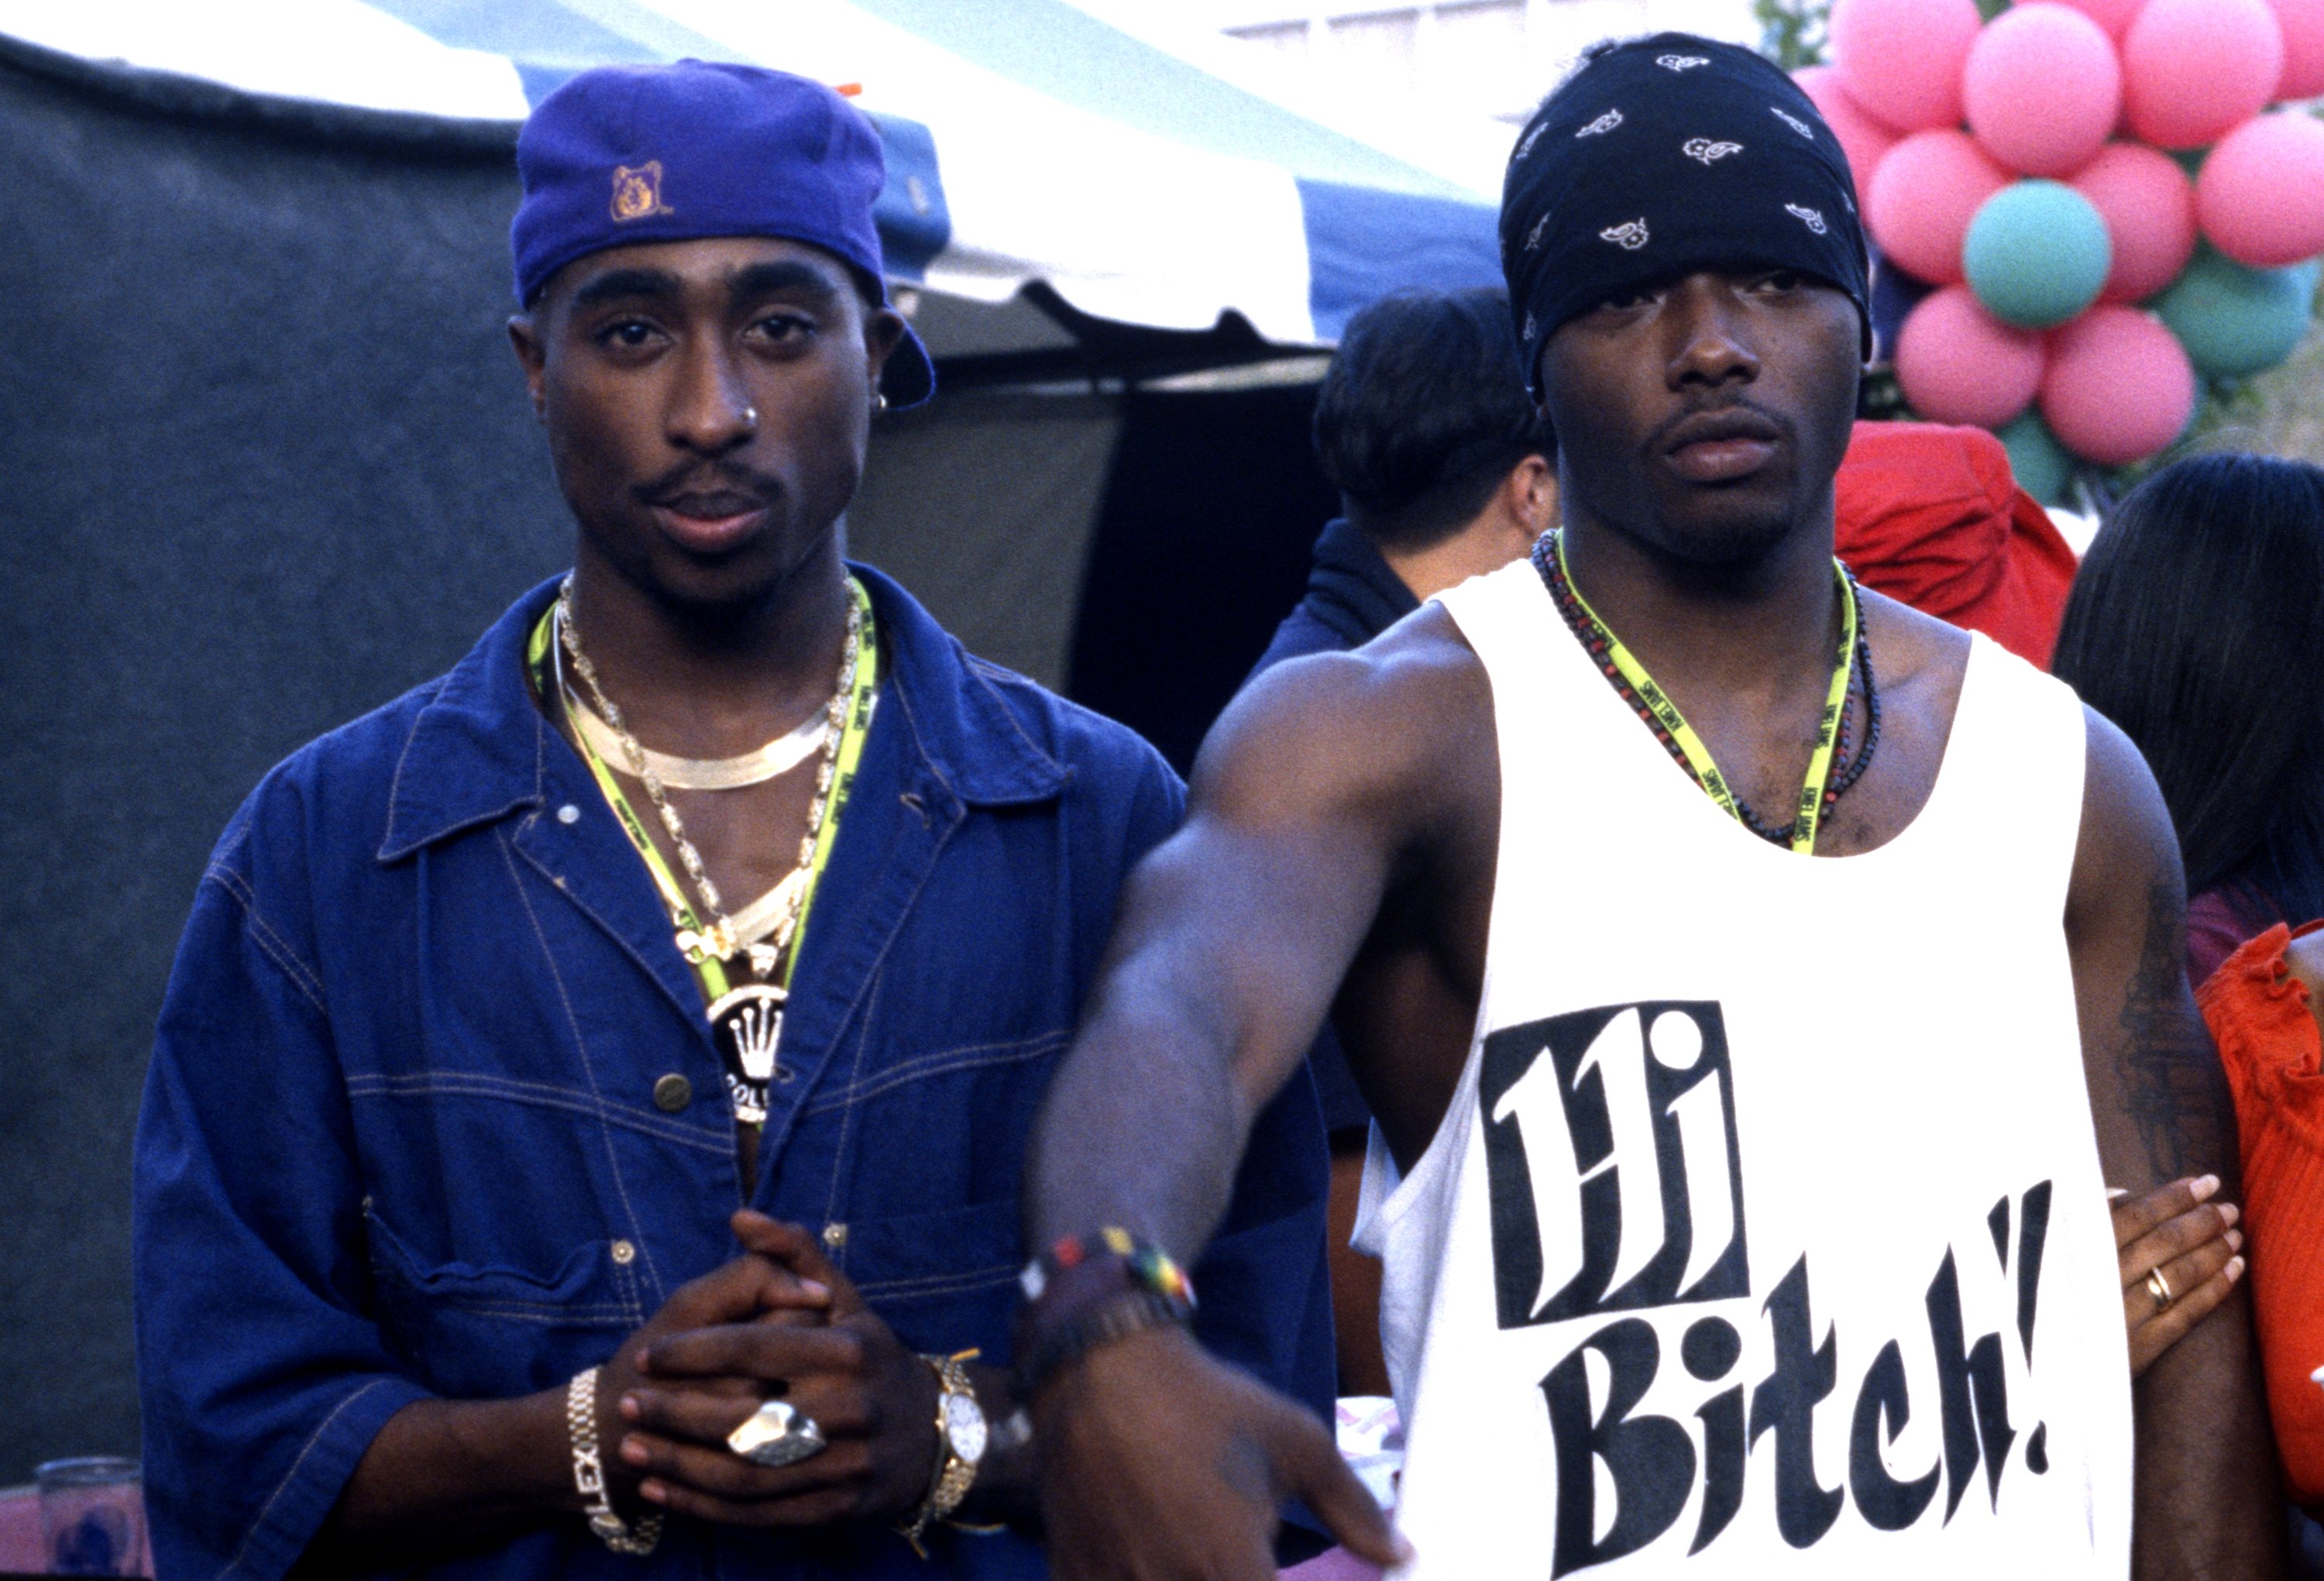 Tupac Shakur (L) and Treach from Naughty by Nature backstage at KMEL Summer Jam 1992 at Shoreline Amphitheatre on August 1, 1992. | Photo: Getty Images